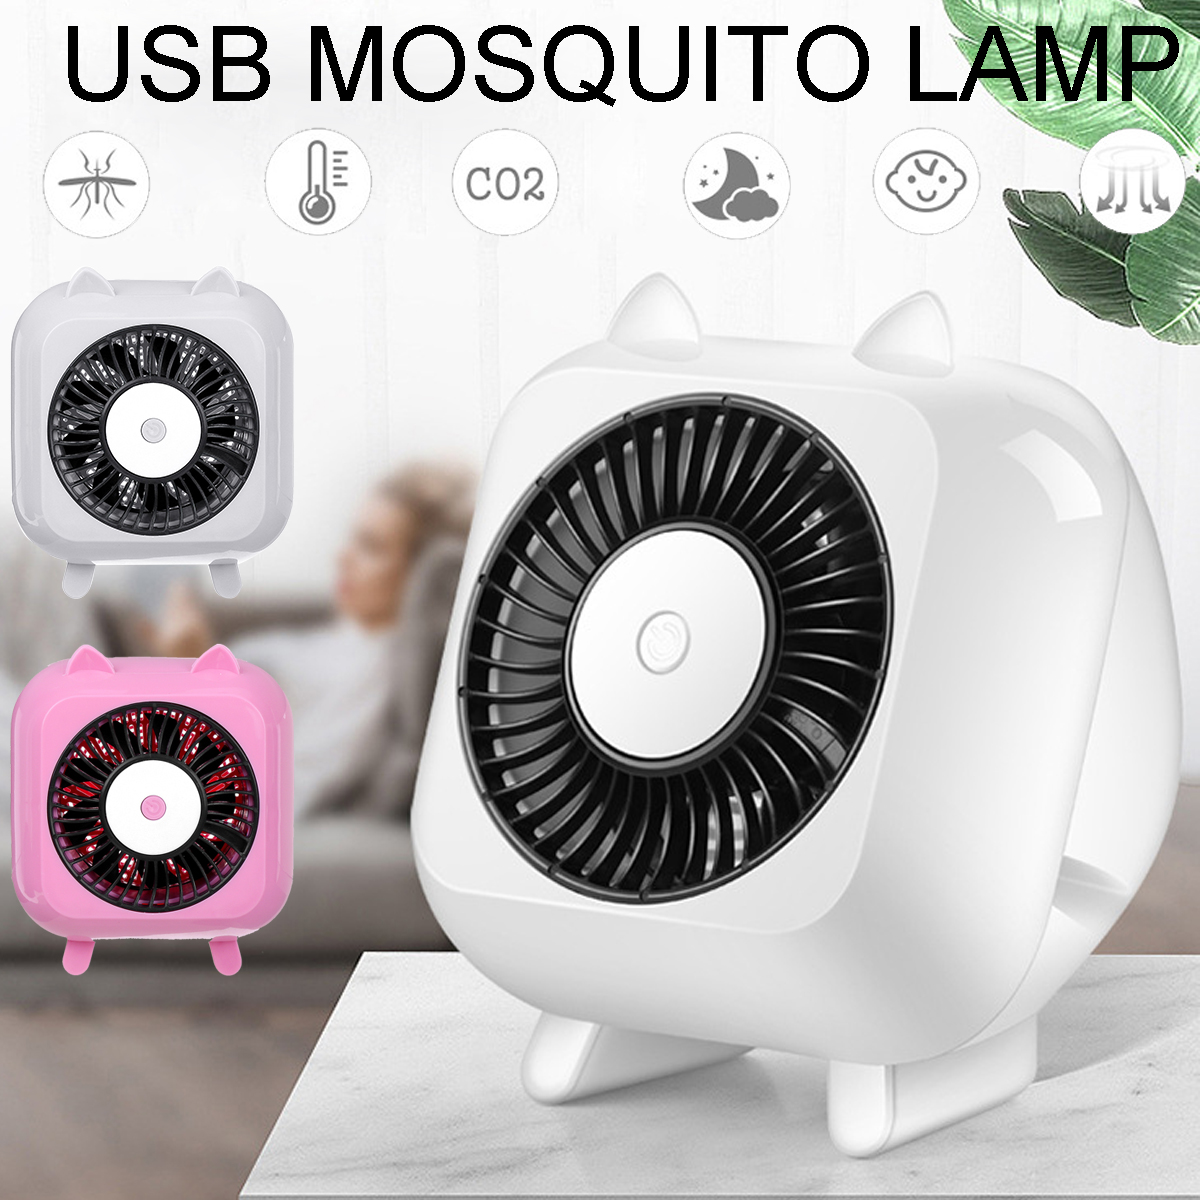 USB-Electric-Fly-Bug-Zapper-Mosquito-Insect-Killer-LED-Light-Trap-Lamp-Pest-Control-1520403-1